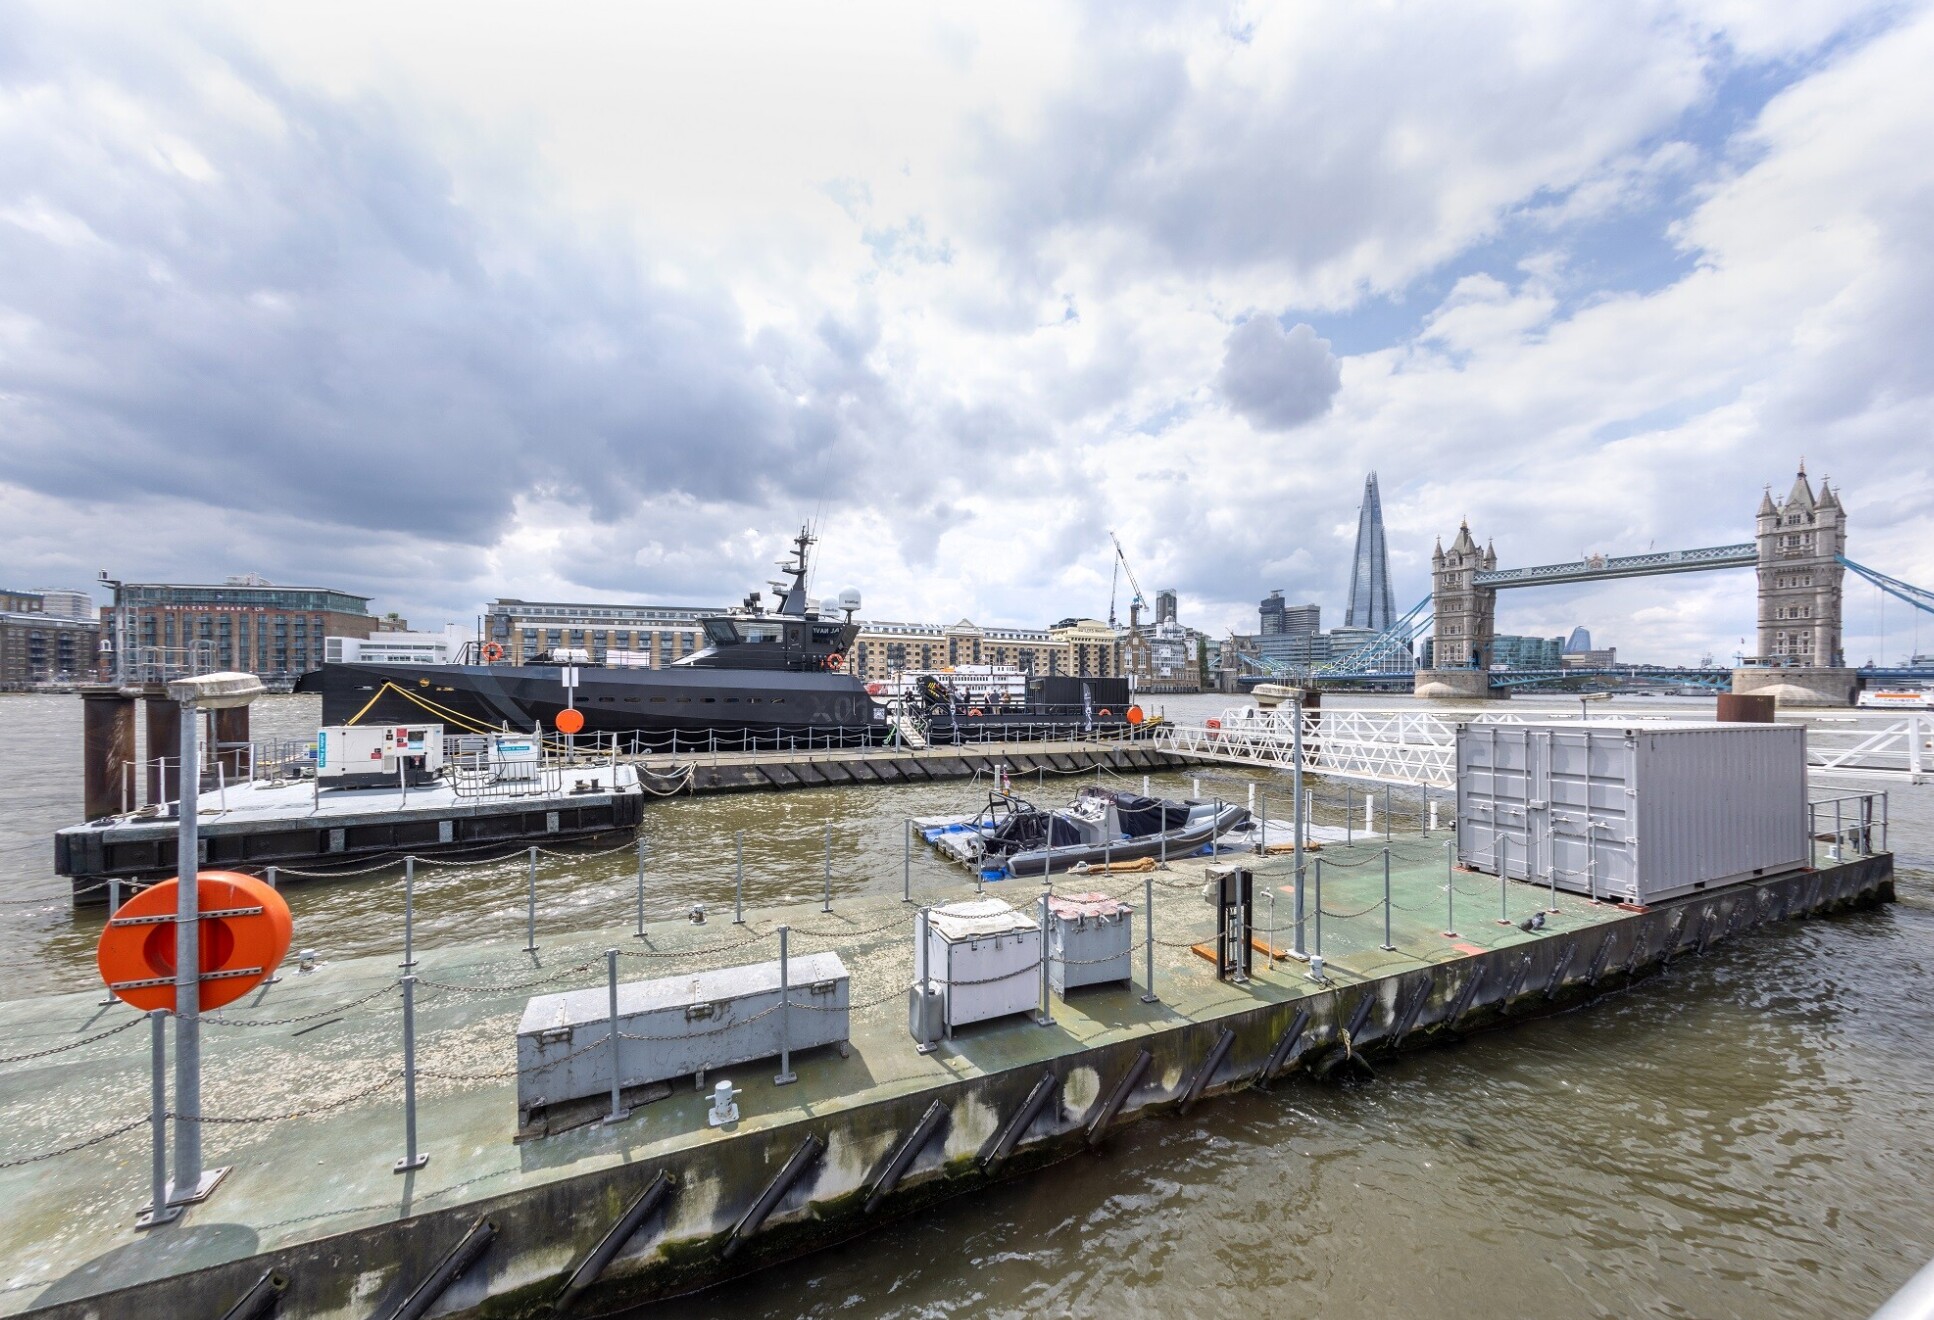 A black ship with Tower Bridge and The Shard in the background, plus pontoons in the foreground